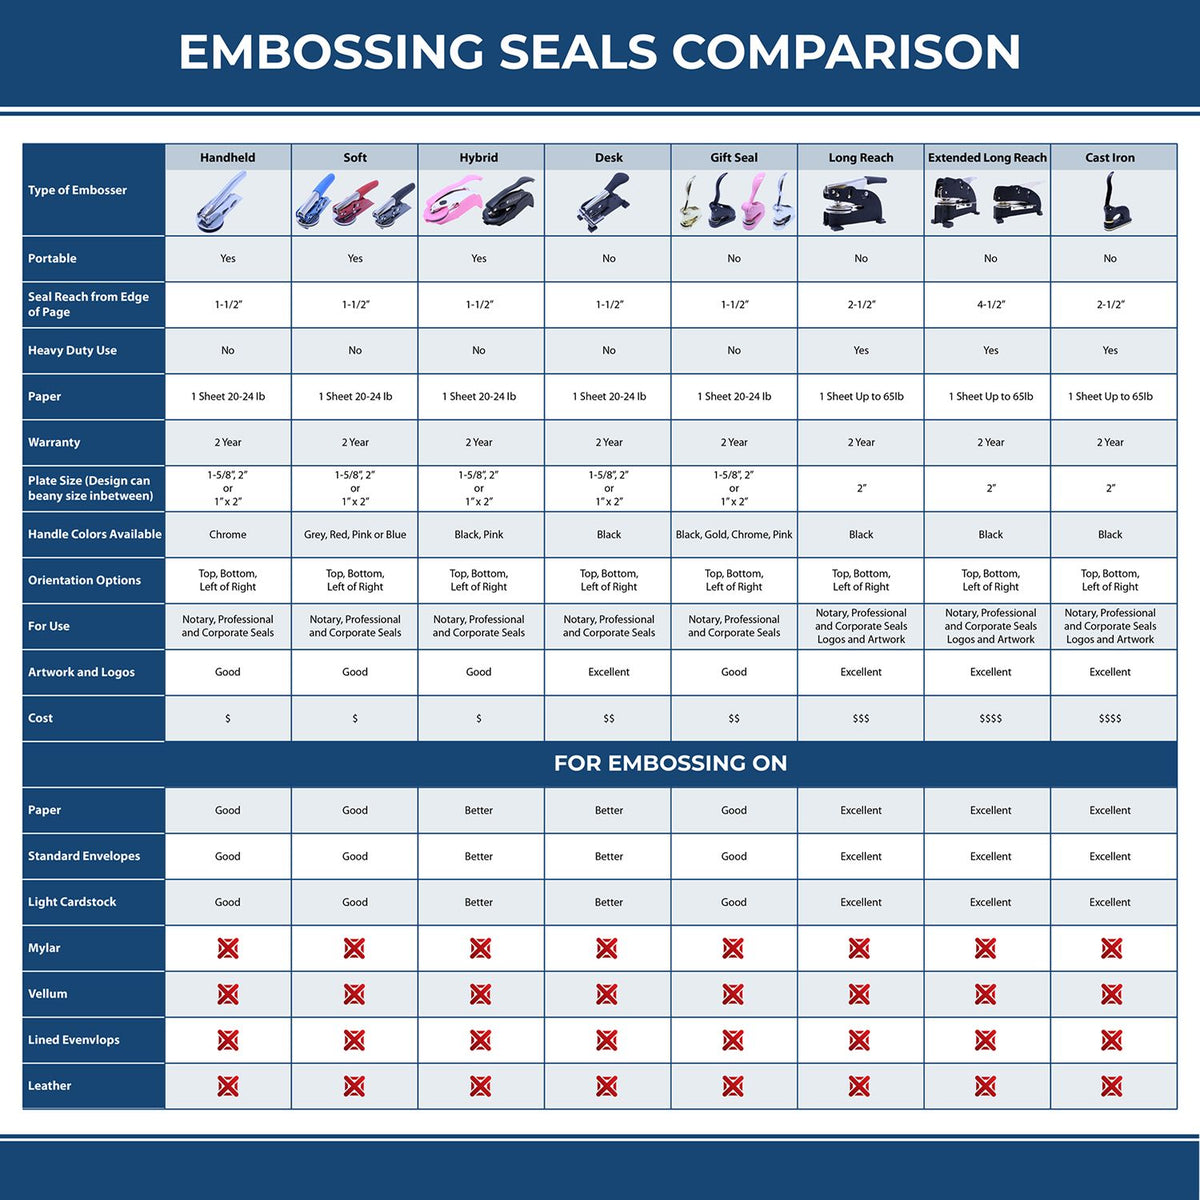 A comparison chart for the different types of mount models available for the Extended Long Reach Maine Surveyor Embosser.